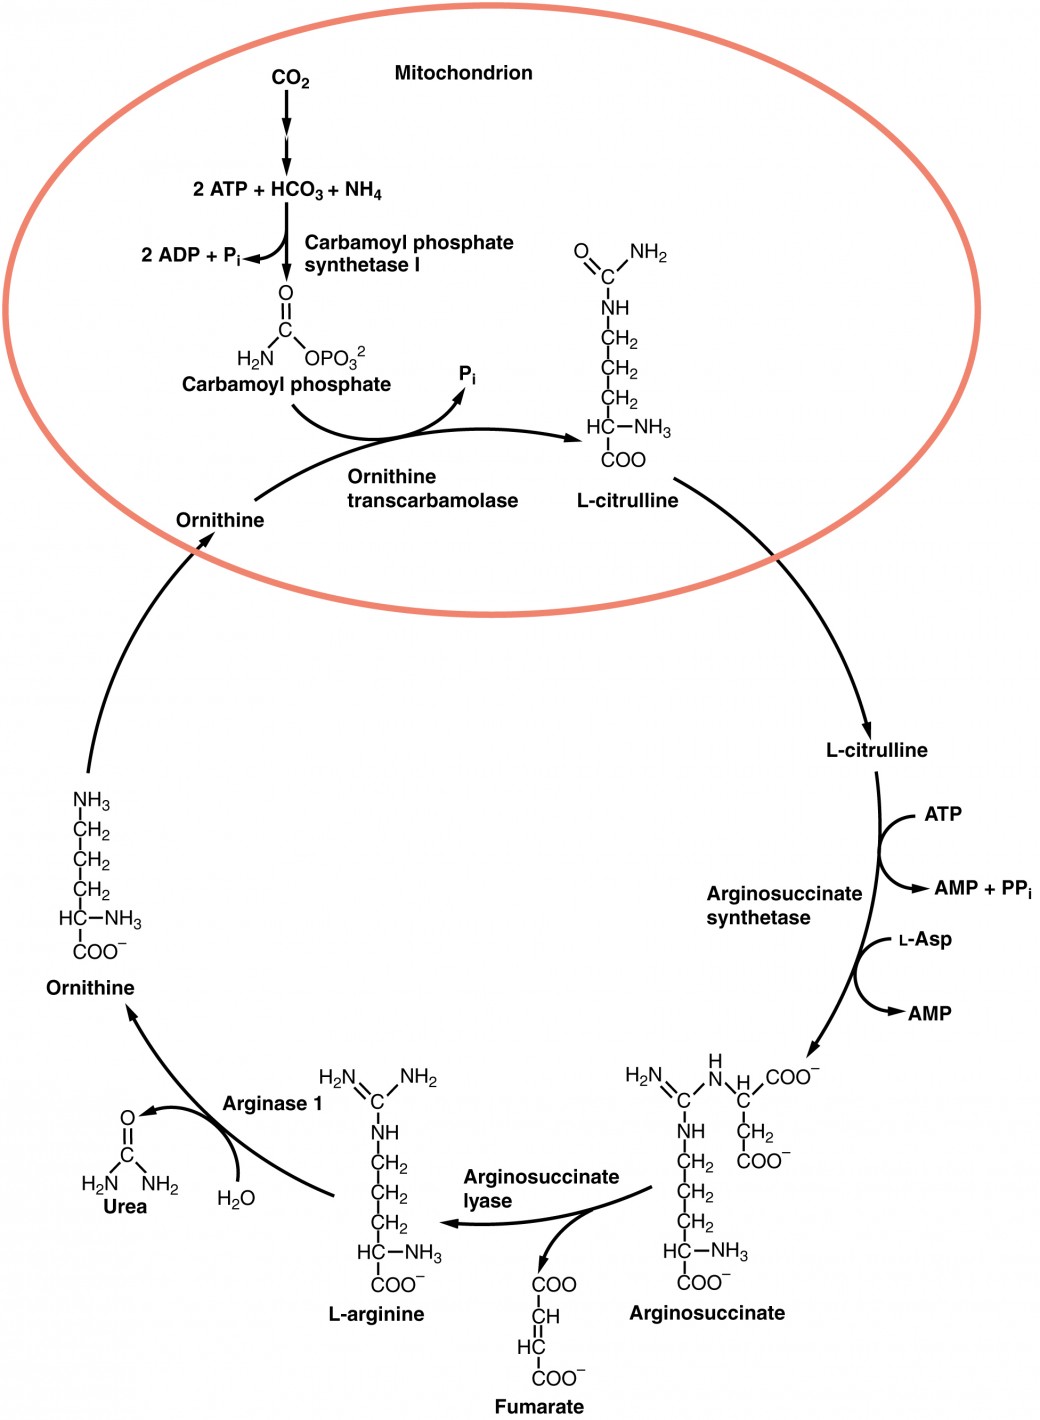 This image shows the reactions of the urea cycle and the organelles in which they take place.